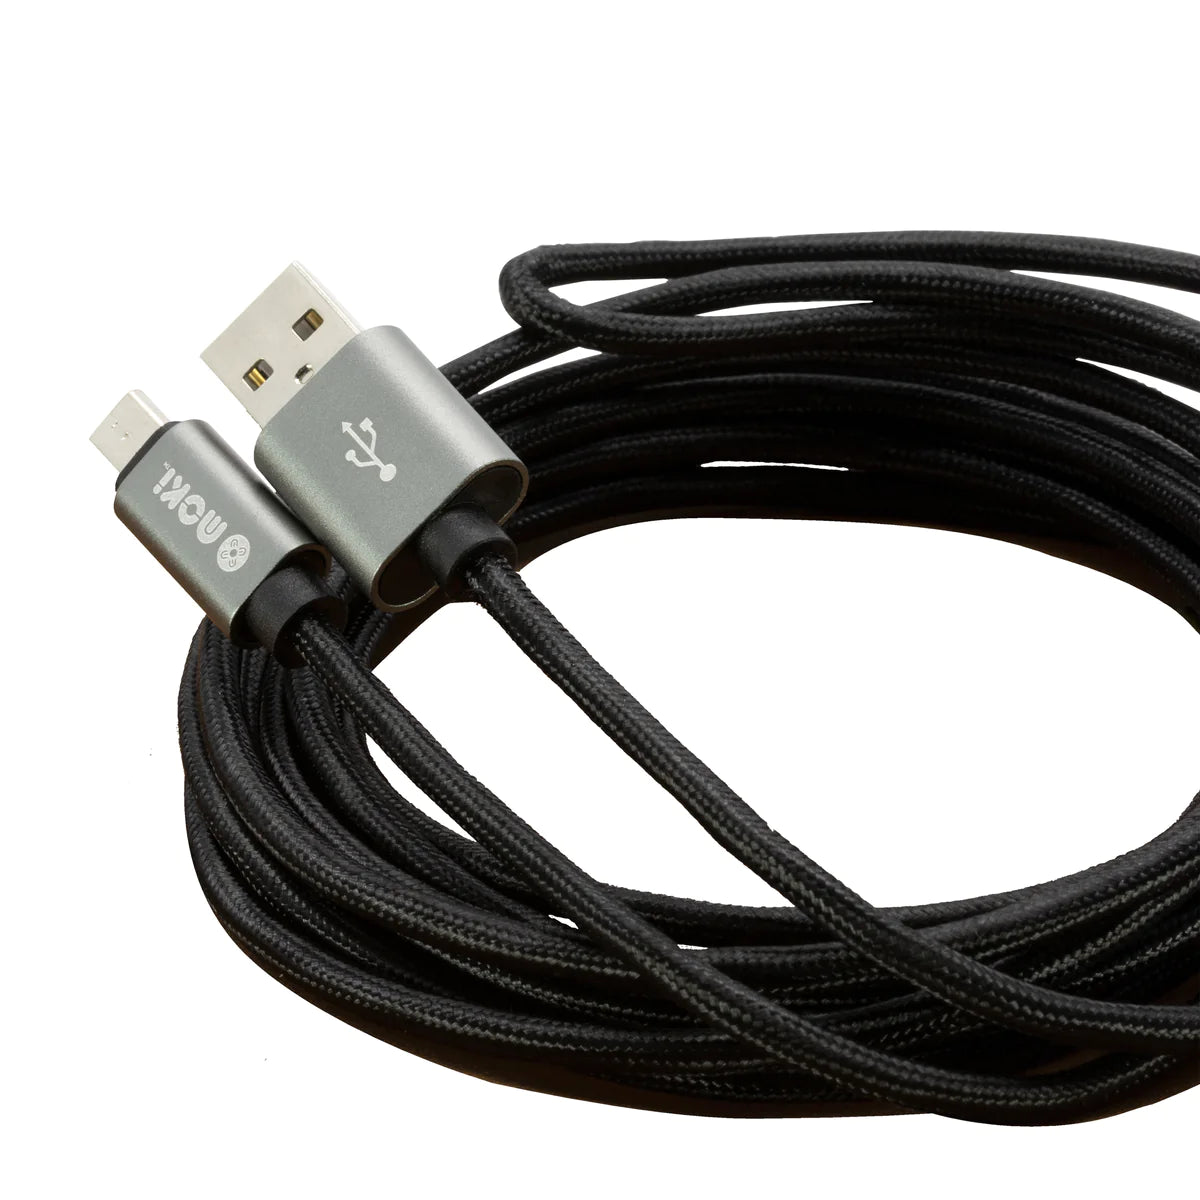 Moki MicroUSB to USB SynCharge Braided Cable 3m